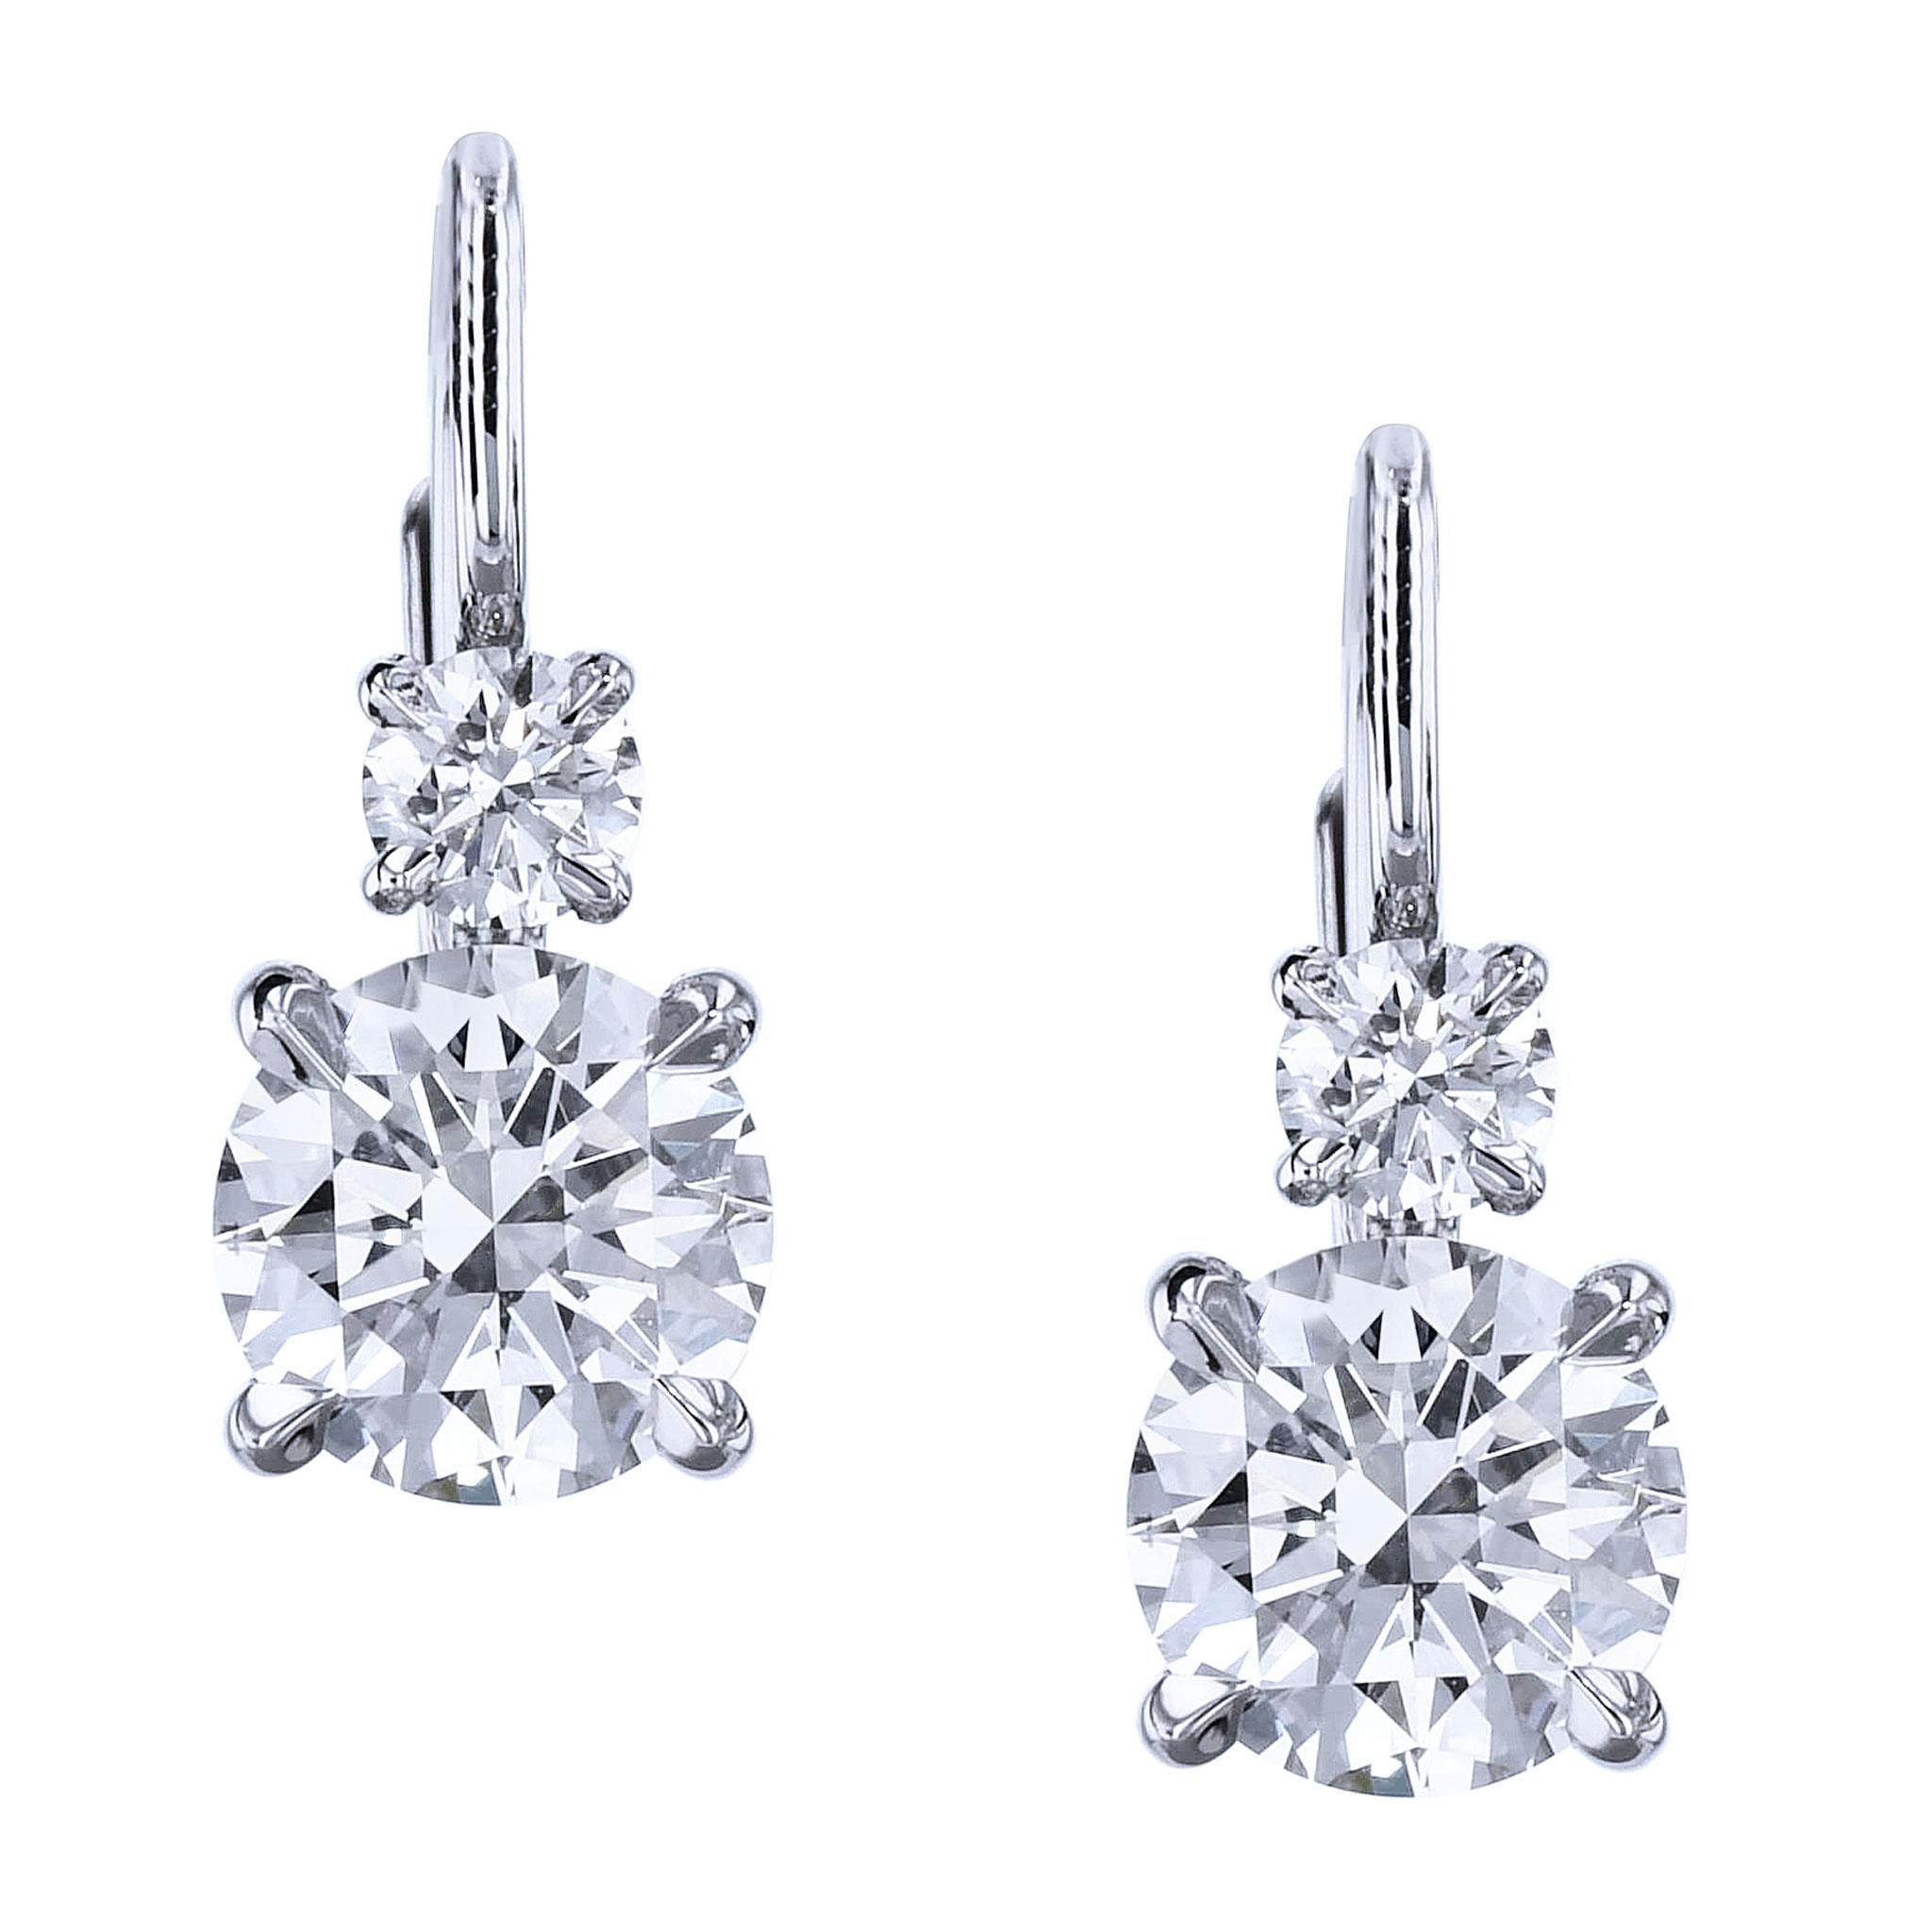 GIA 2.42 Diamond Drop Earrings Lever Back Handmade Earrings

These sparkling earrings are handmade and one of a kind. 
They feature at total of 2.42 carats of white diamonds. 

They are created in 18 karat white gold.

The top diamonds are a total